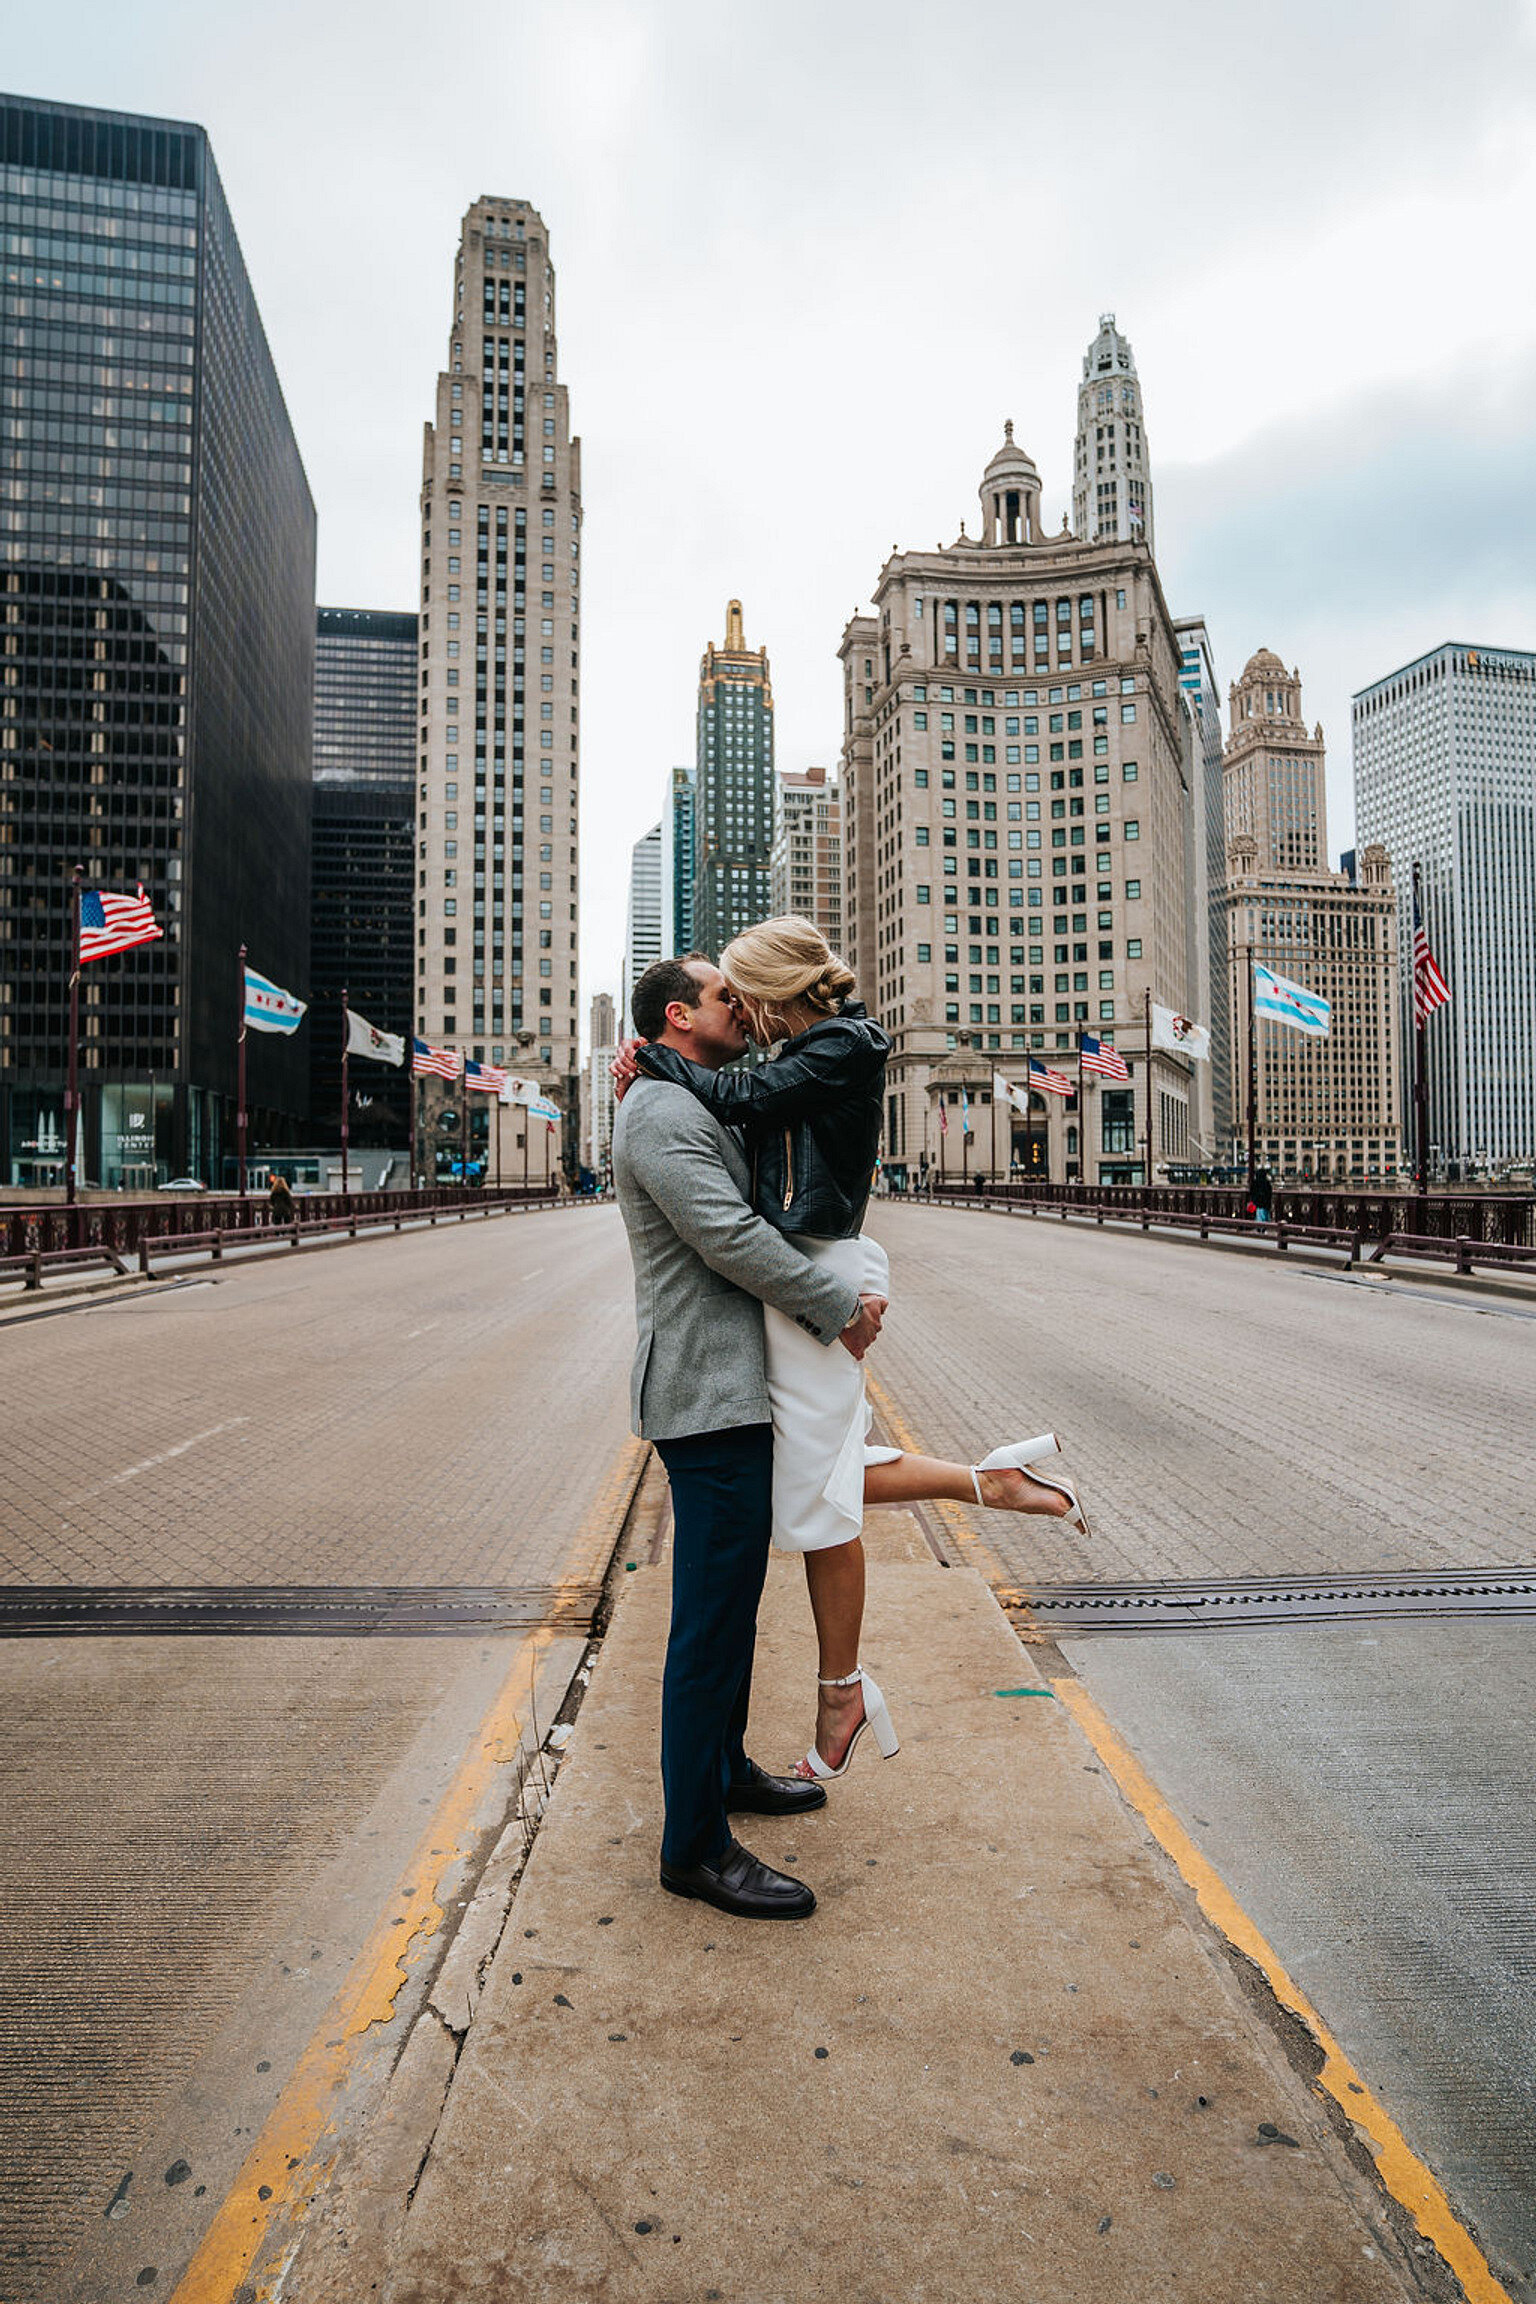 Intimate Chicago Elopement captured by Windy City Production featured on CHI thee WED